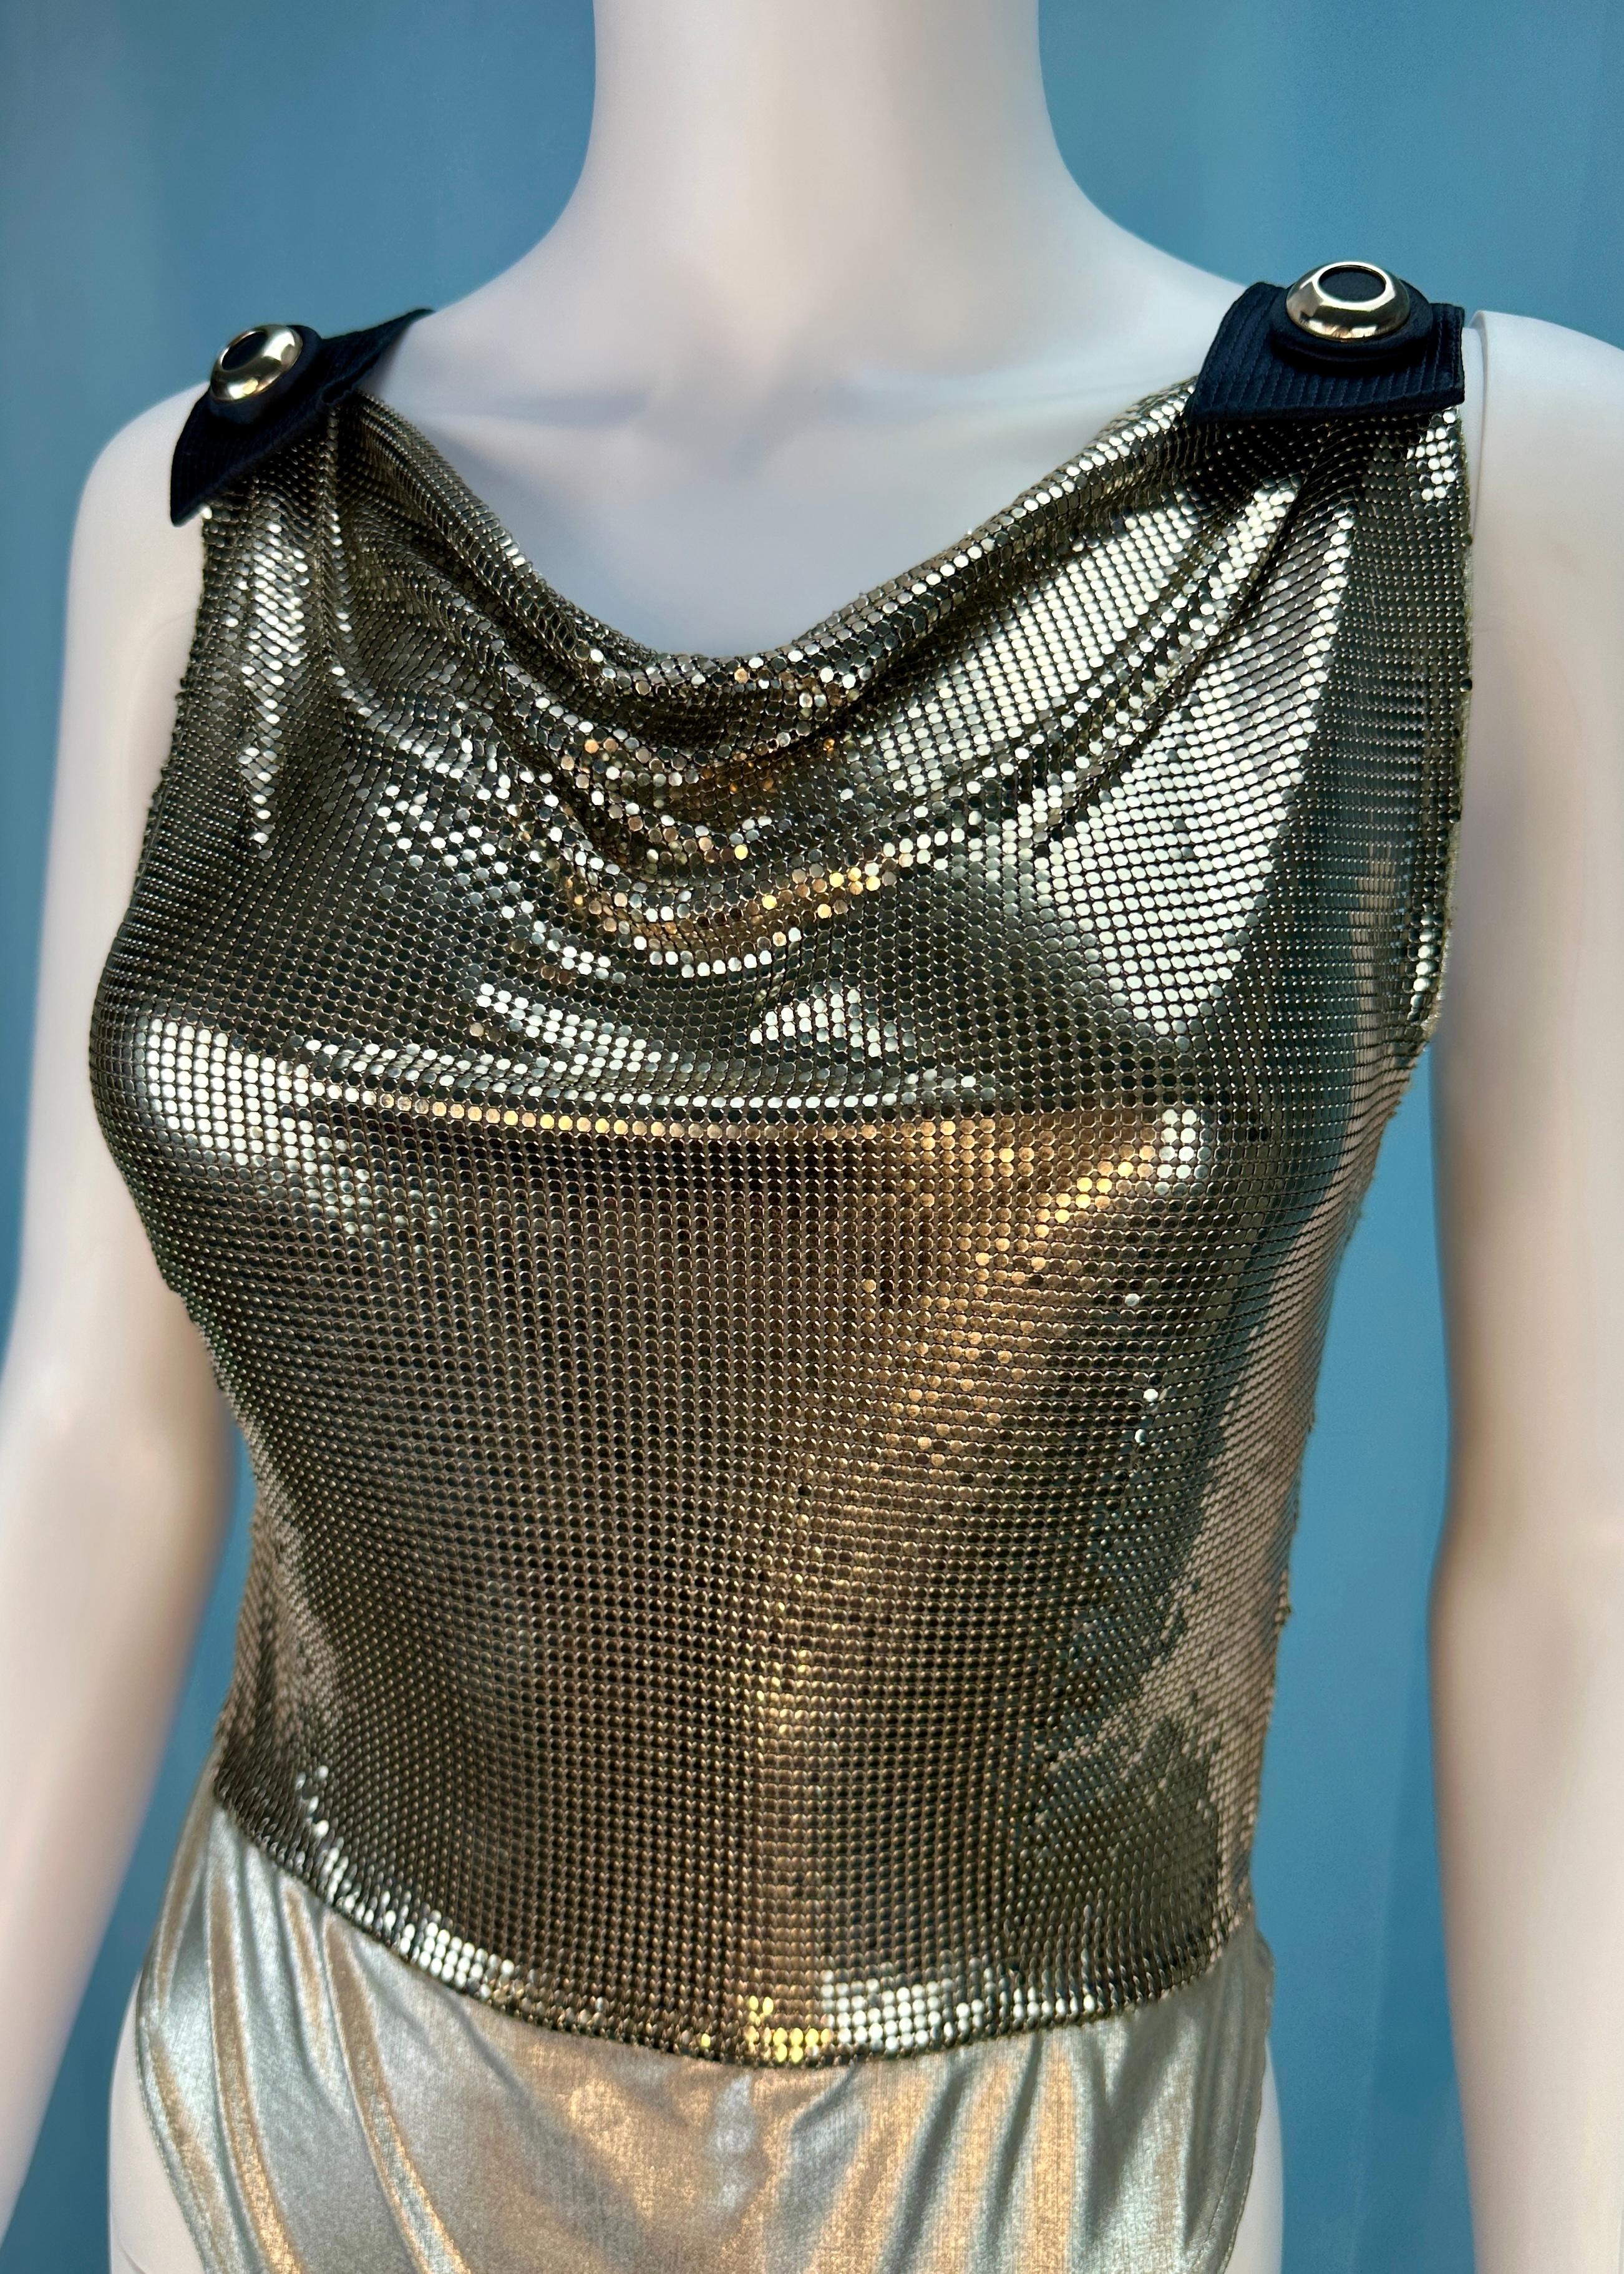 Atelier Versace 
Spring 1994
Atelier Versace - Versace’s haute couture made-to-order line 
Most likely a one of a kind piece

Silver tone metal Oroton chainmail bodysuit
Cowl neckline 
Stretch fabric section on lower body, with hook and eye bodysuit